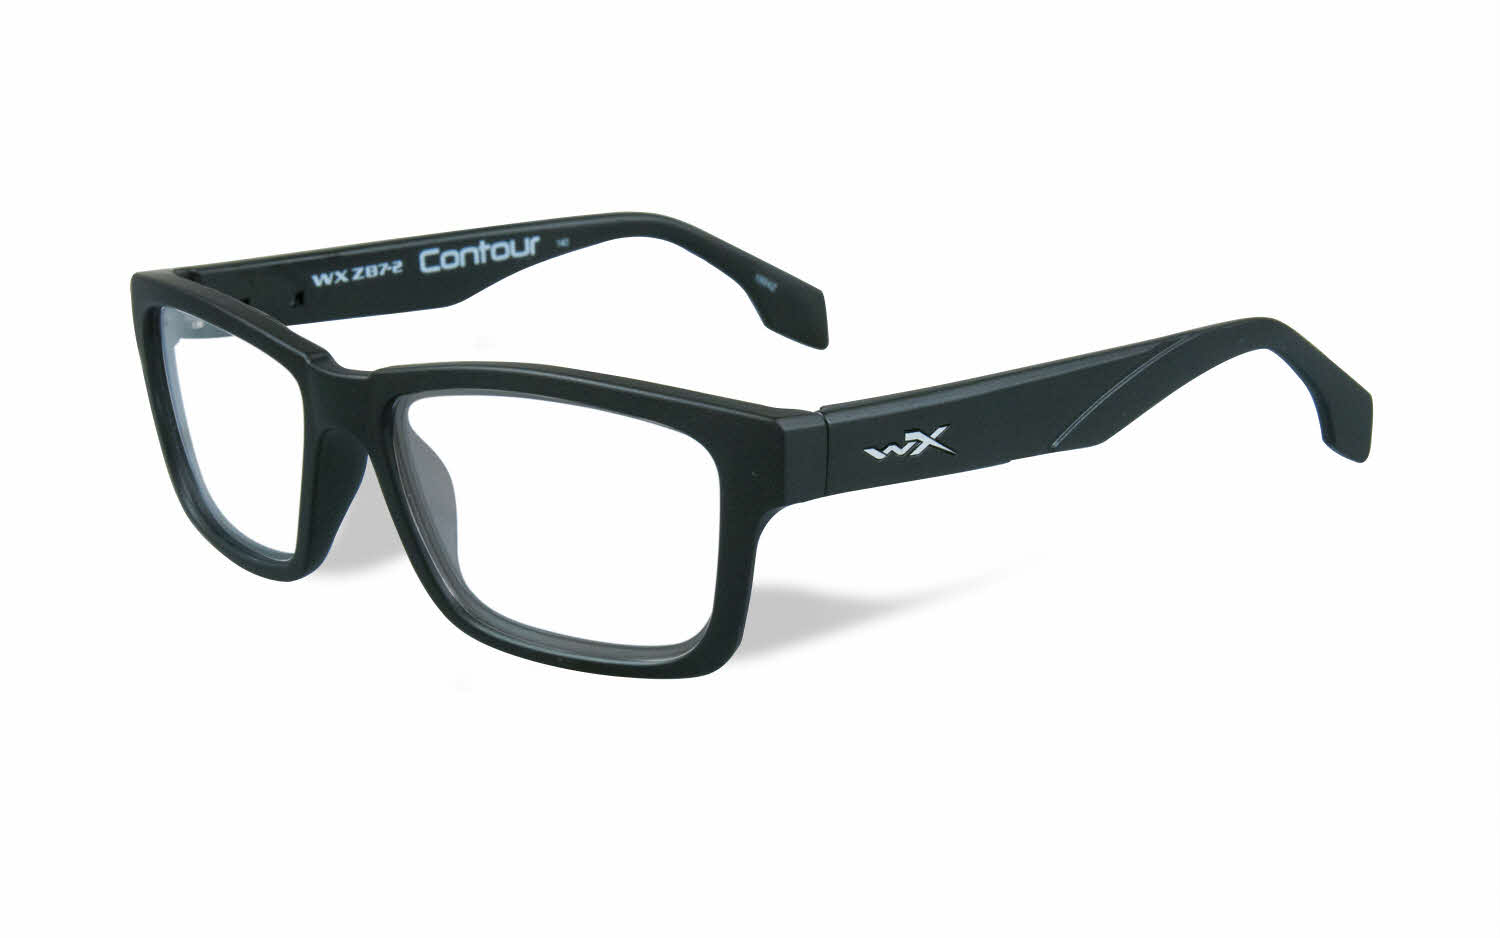 Wiley X WorkSight WX Contour with Side Shields Eyeglasses